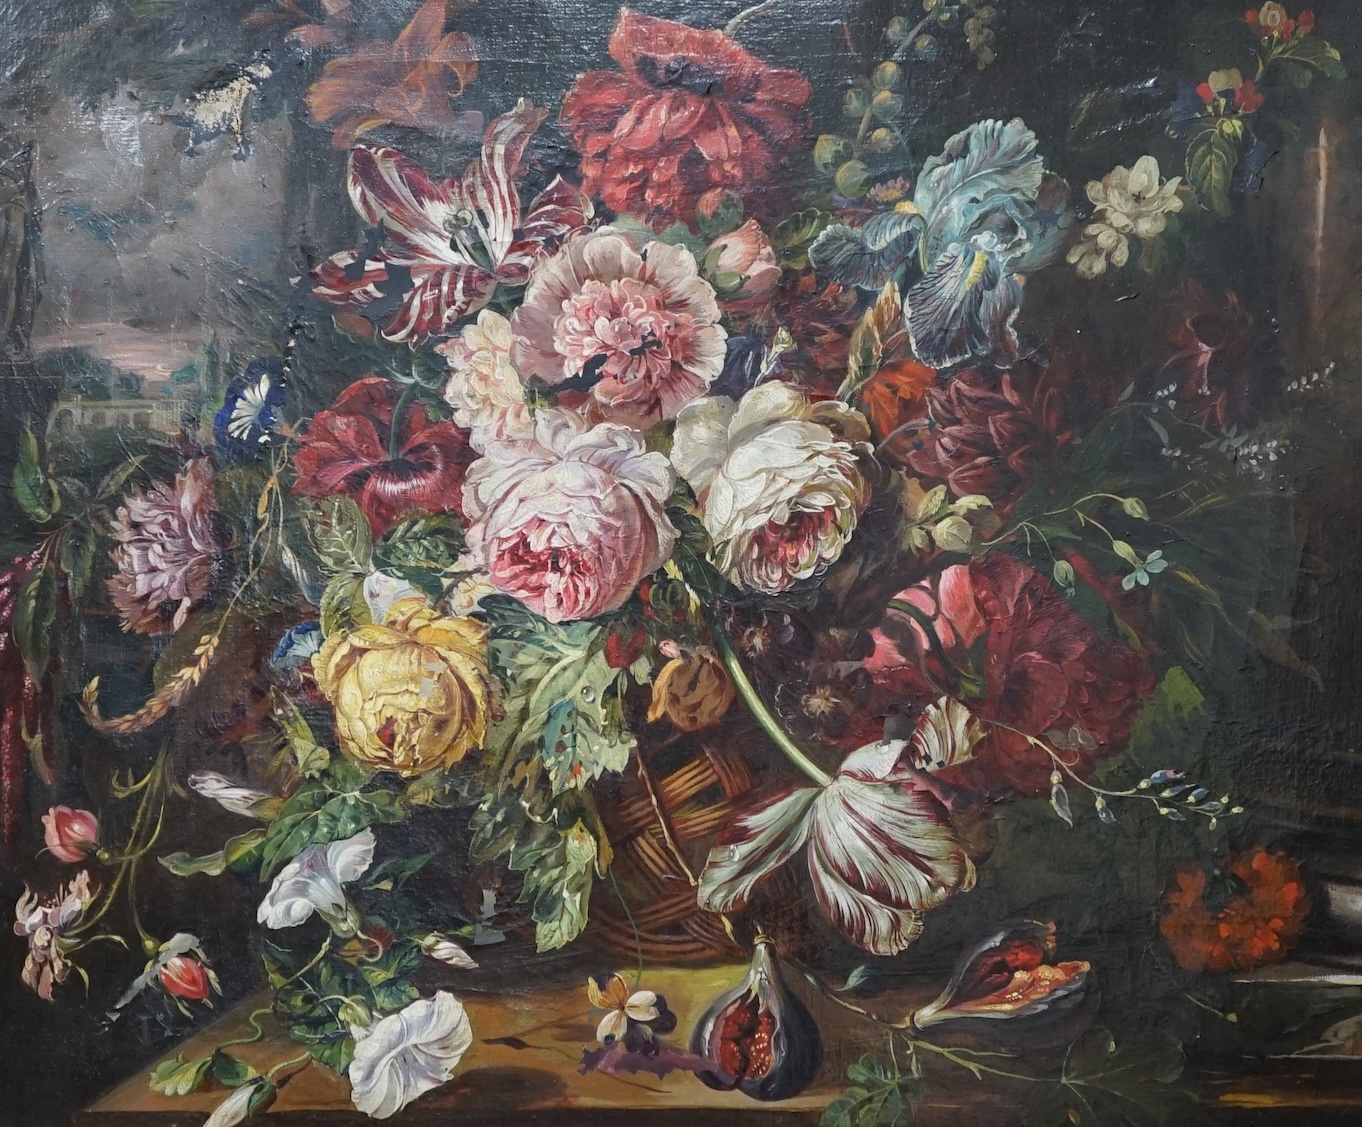 17th century Dutch style, oil on canvas, Still life of roses before a classical landscape, unsigned, 62 x 74cm. Condition - poor